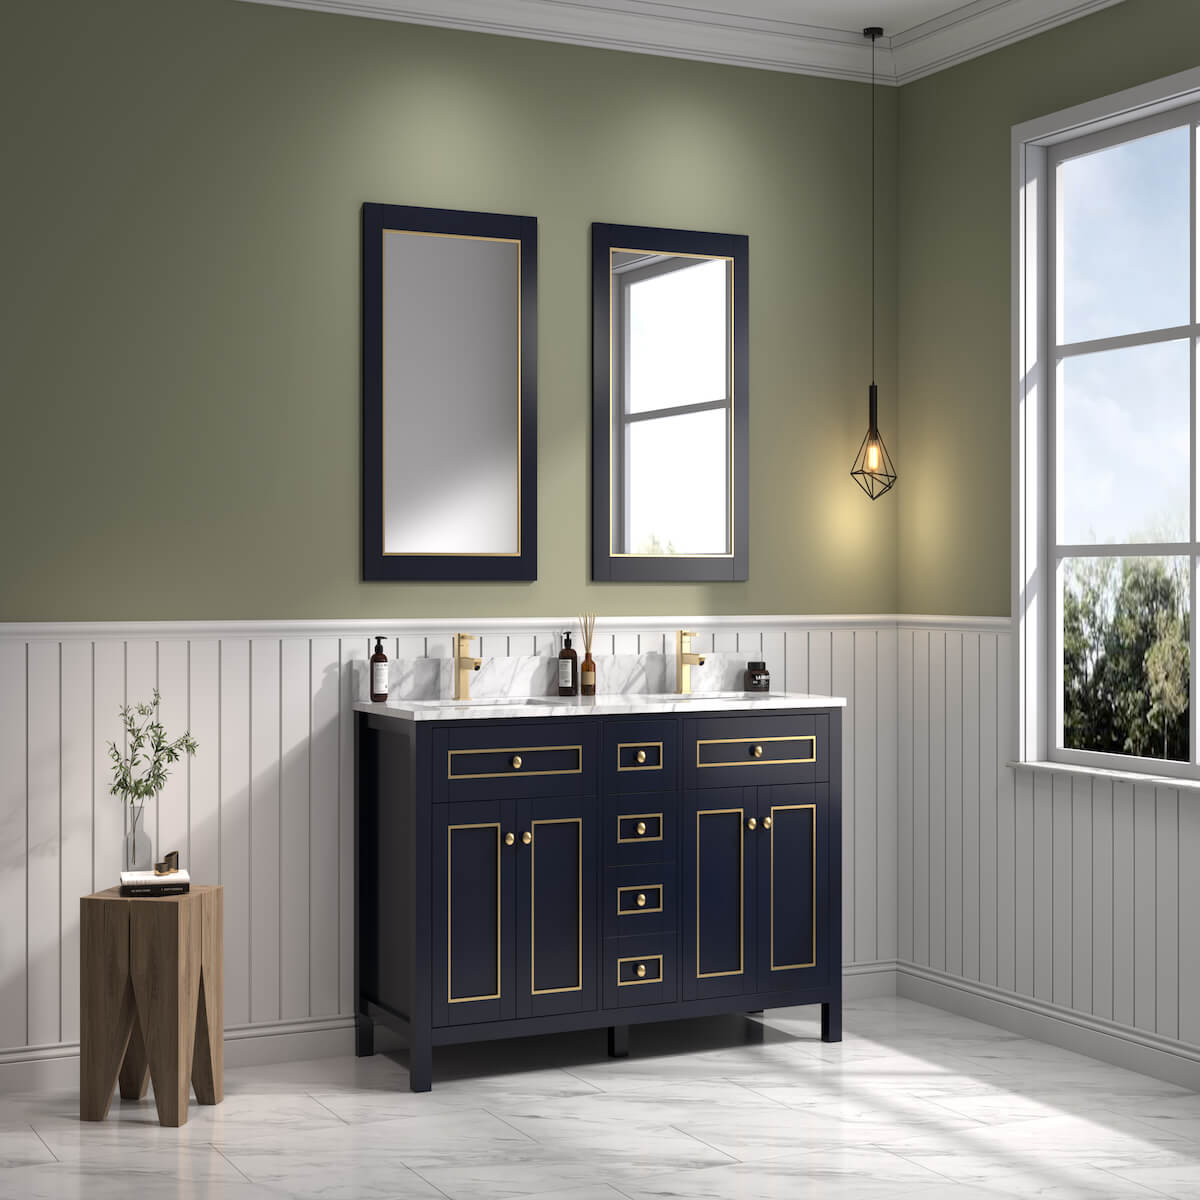 Legion Furniture 60" Blue Finish Double Sink Vanity Cabinet with Carrara White Top in Bathroom Side WV2260-B